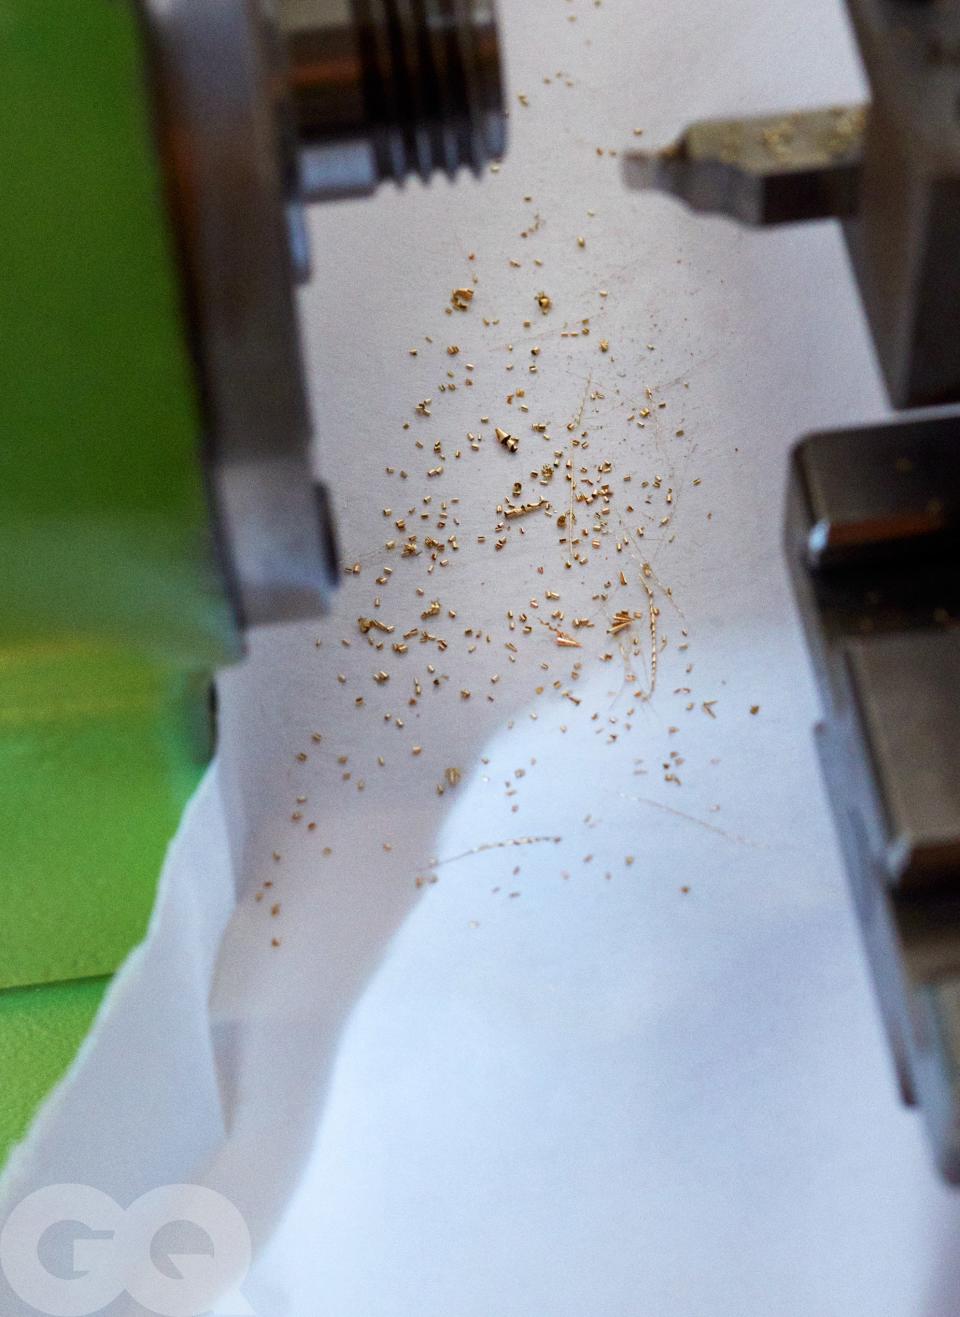 The shavings produced by the dial engraving process.